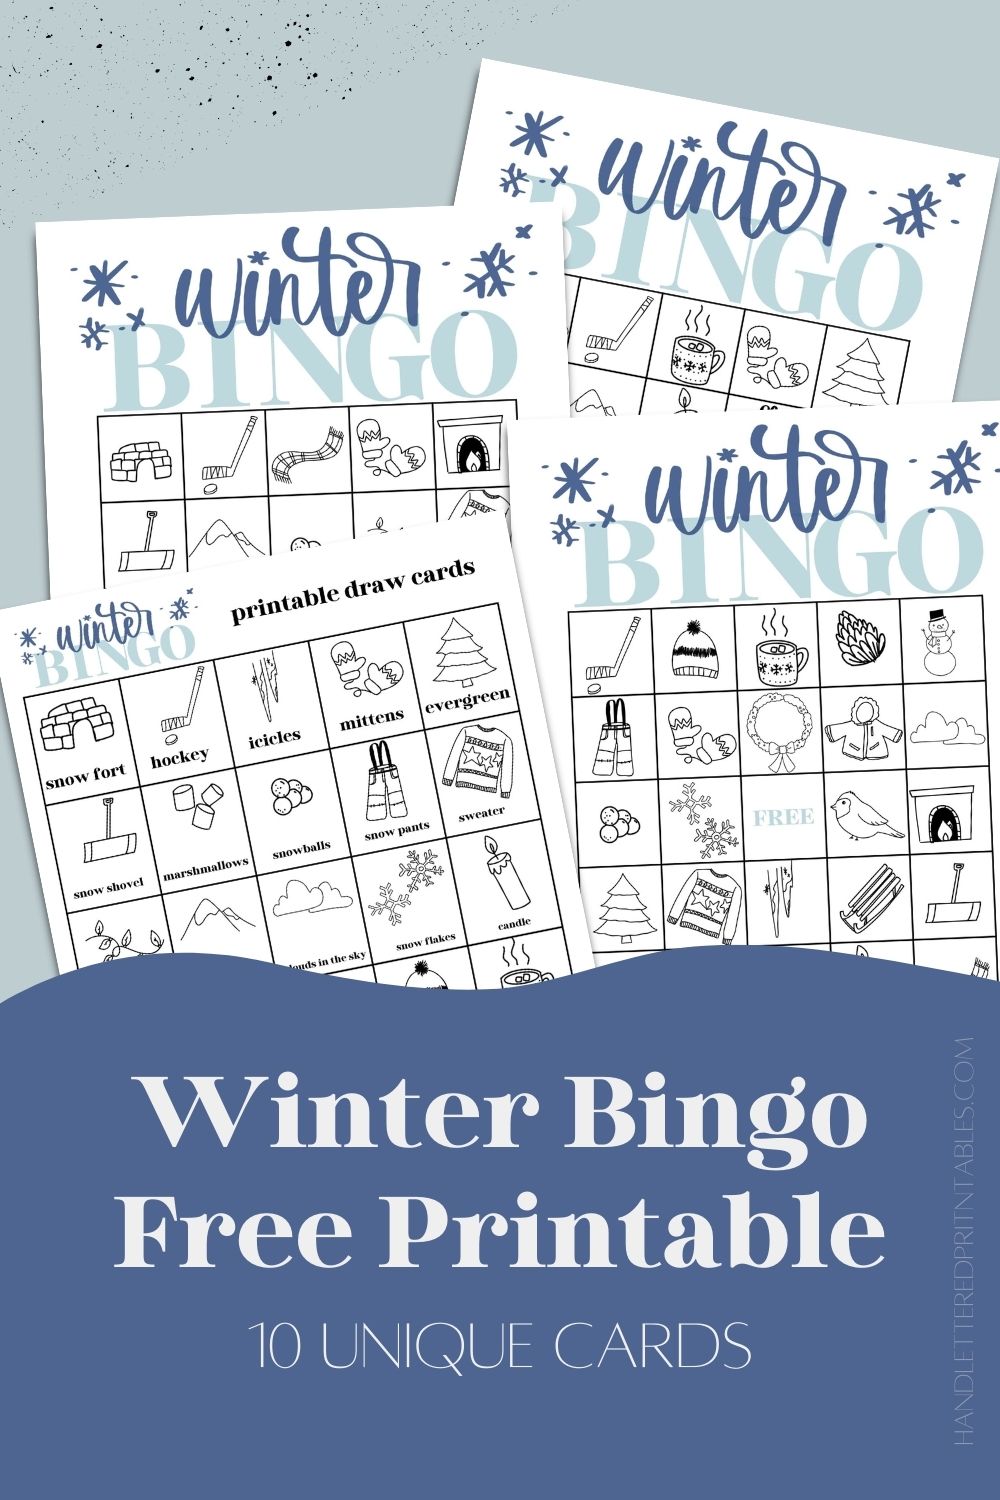 text over reads: winter bingo free printable 10 unique cards image of a few of the bingo cards with calling cards printed on light blue background